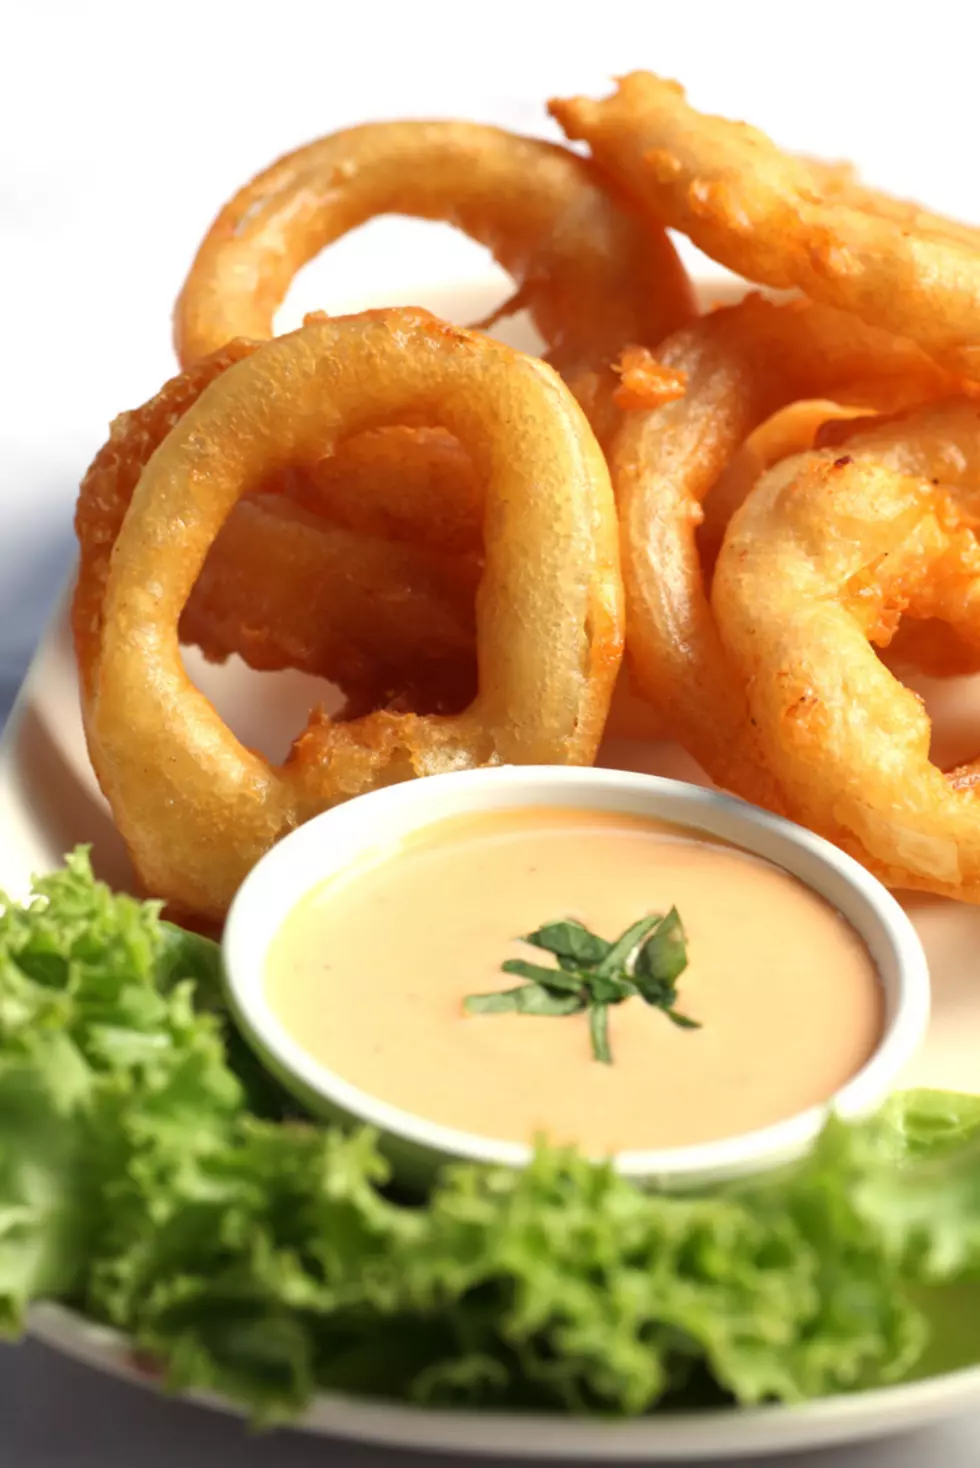 [GALLERY] Yelp! Best Places For Onion Rings In the Greater Binghamton Area